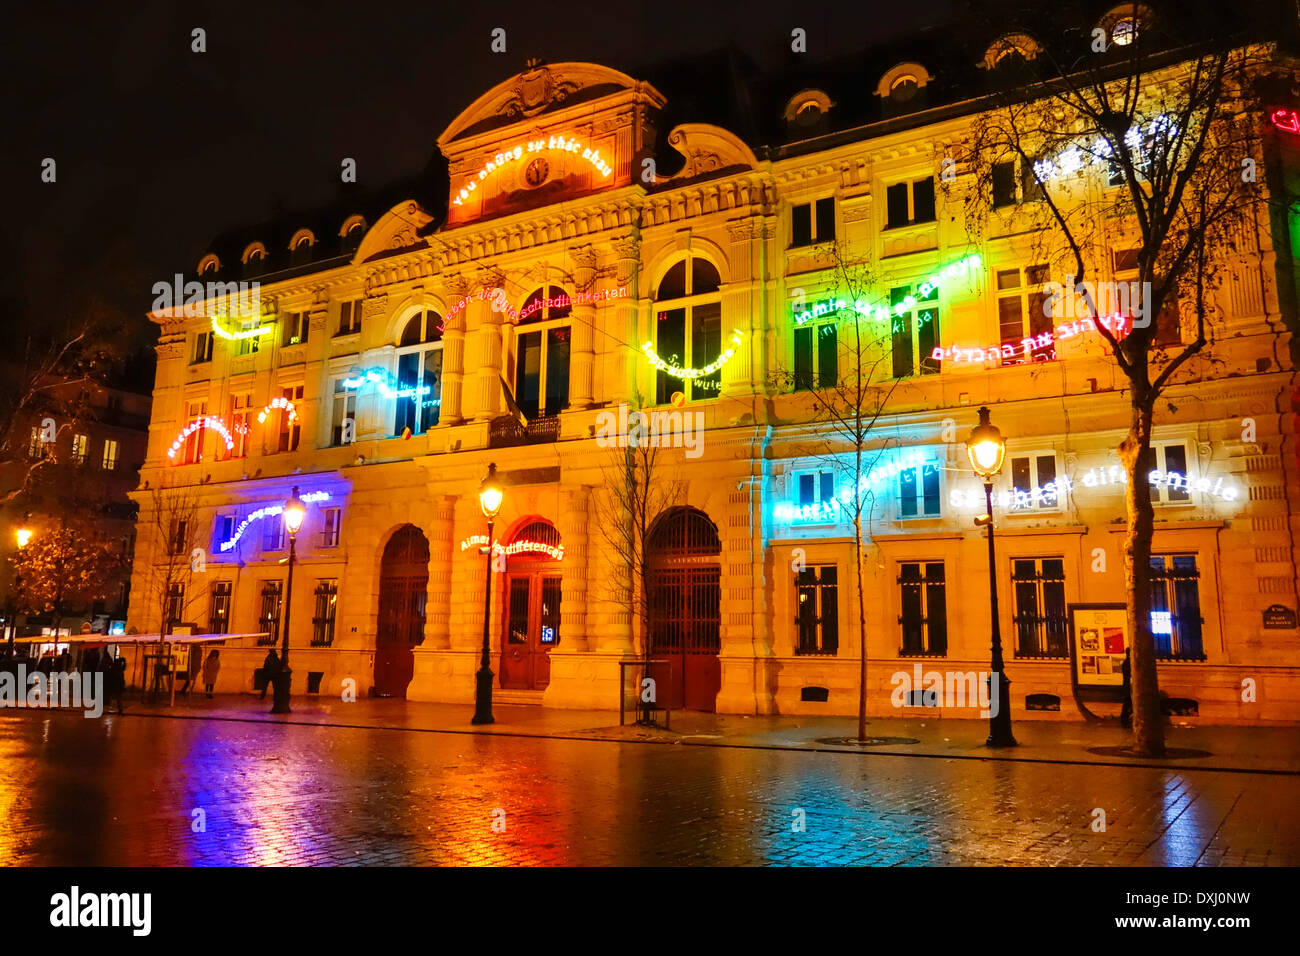 he Mairie of the IVth arrondissement decorated with neon signs in many languages celebrating differences, Paris, France Stock Photo